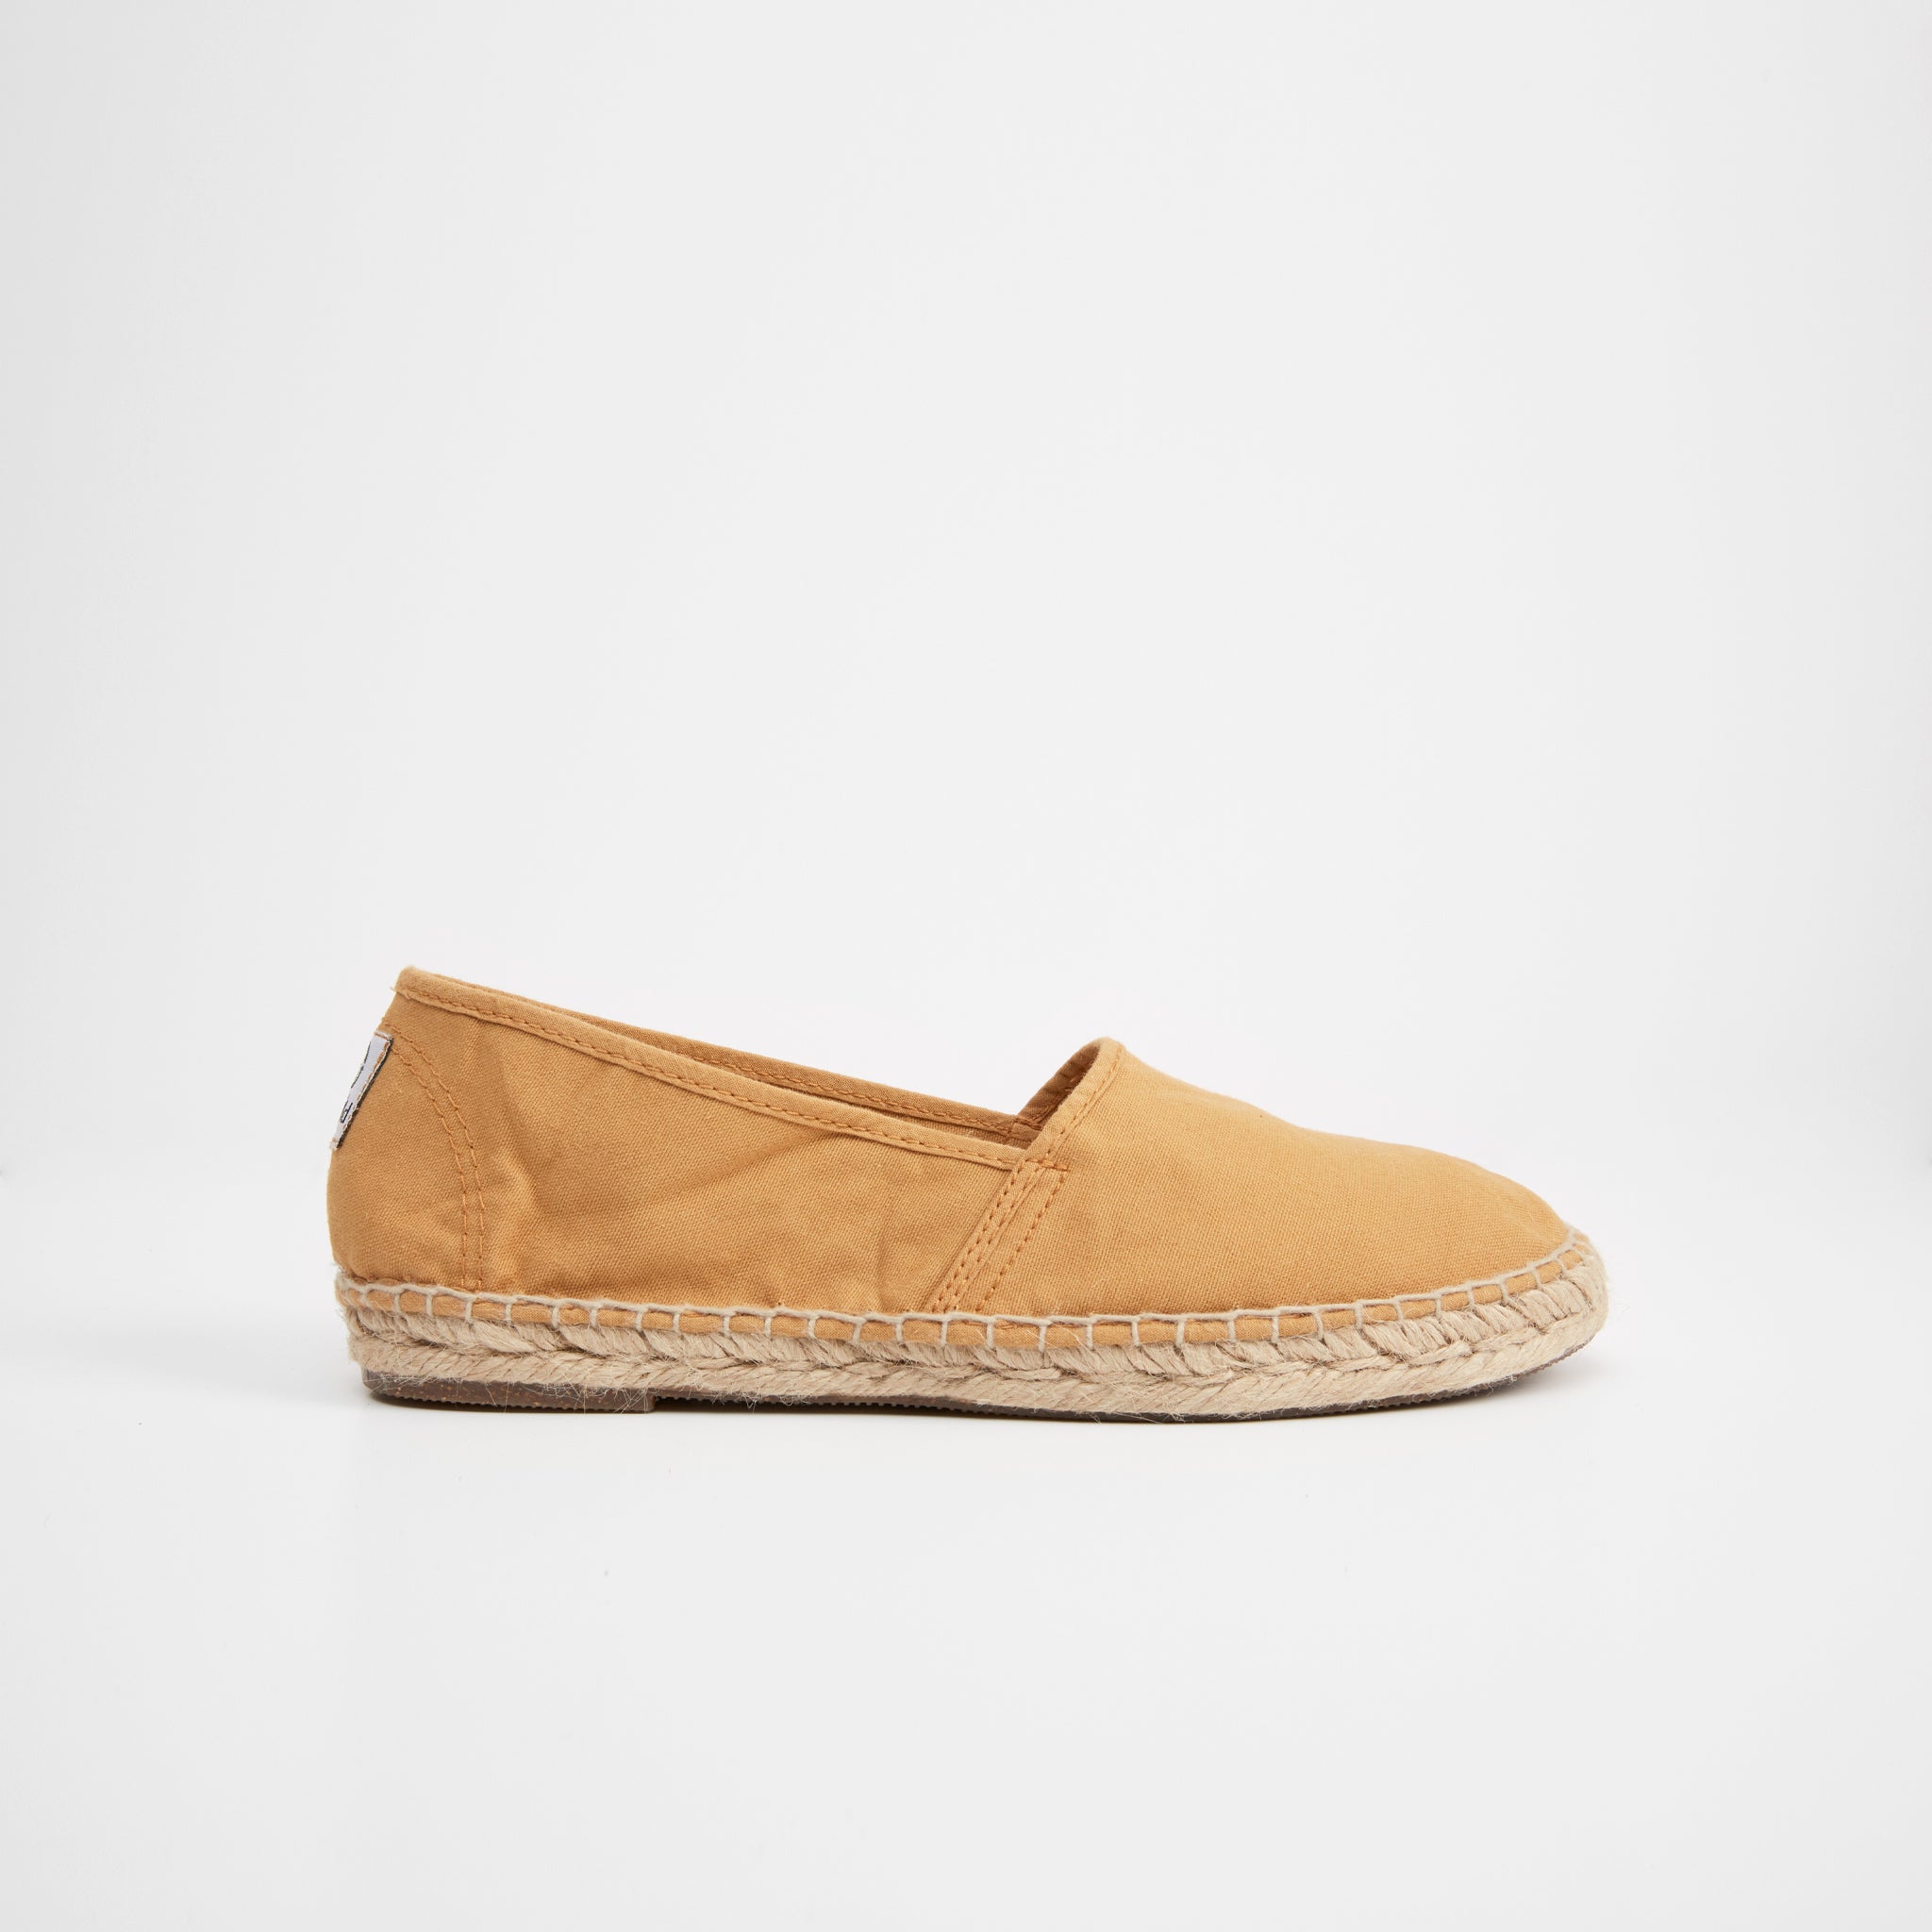 Ethical & Sustainable Women's Shoes - Freedom Shoes